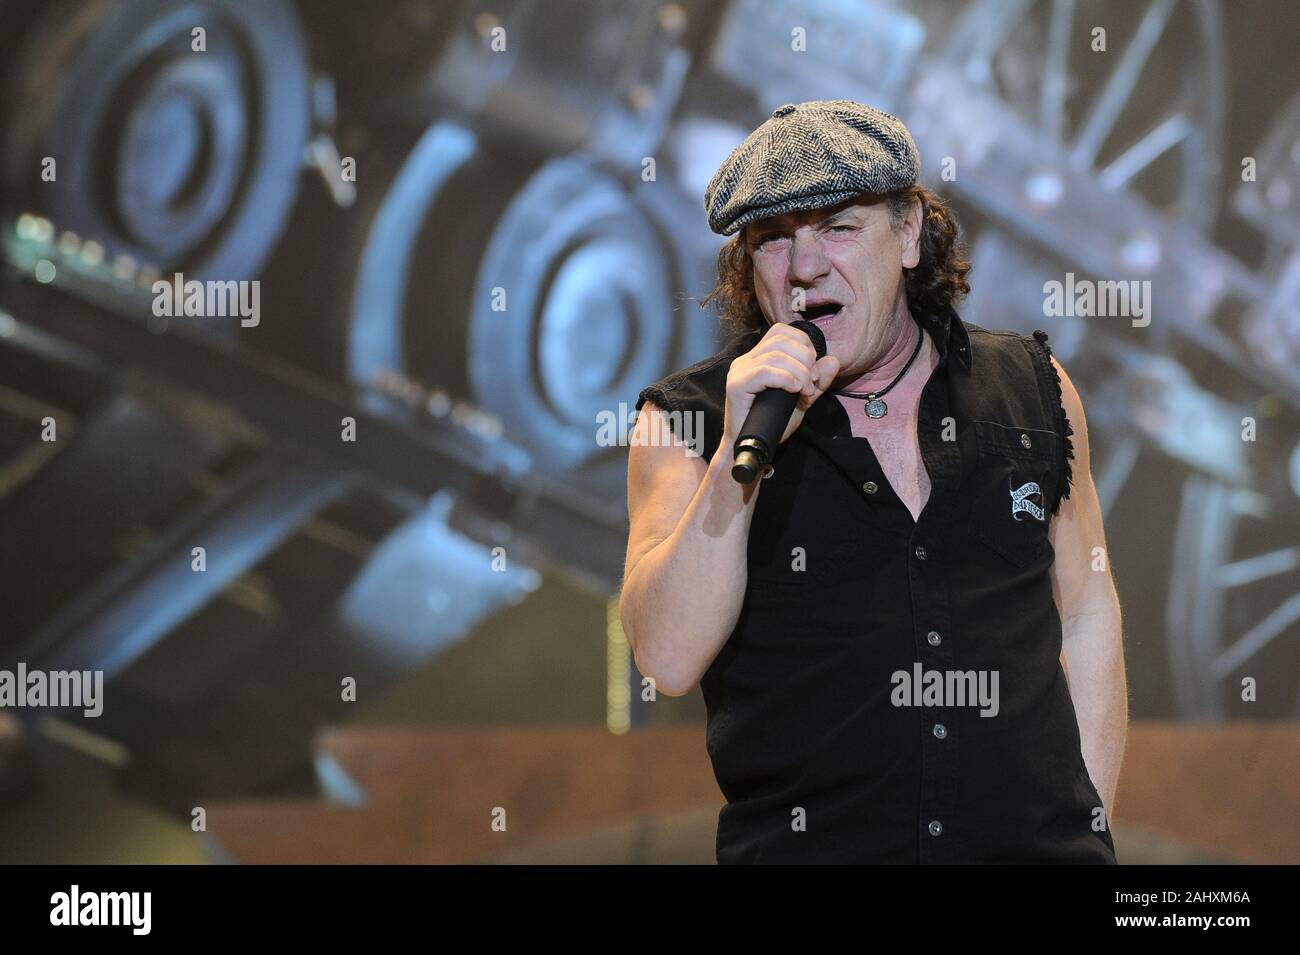 Milano Italy  19/03/2009 : Live concert of AC/DC at the Mediolanum Forum of Assago,Brian Johnson  during the concert Stock Photo